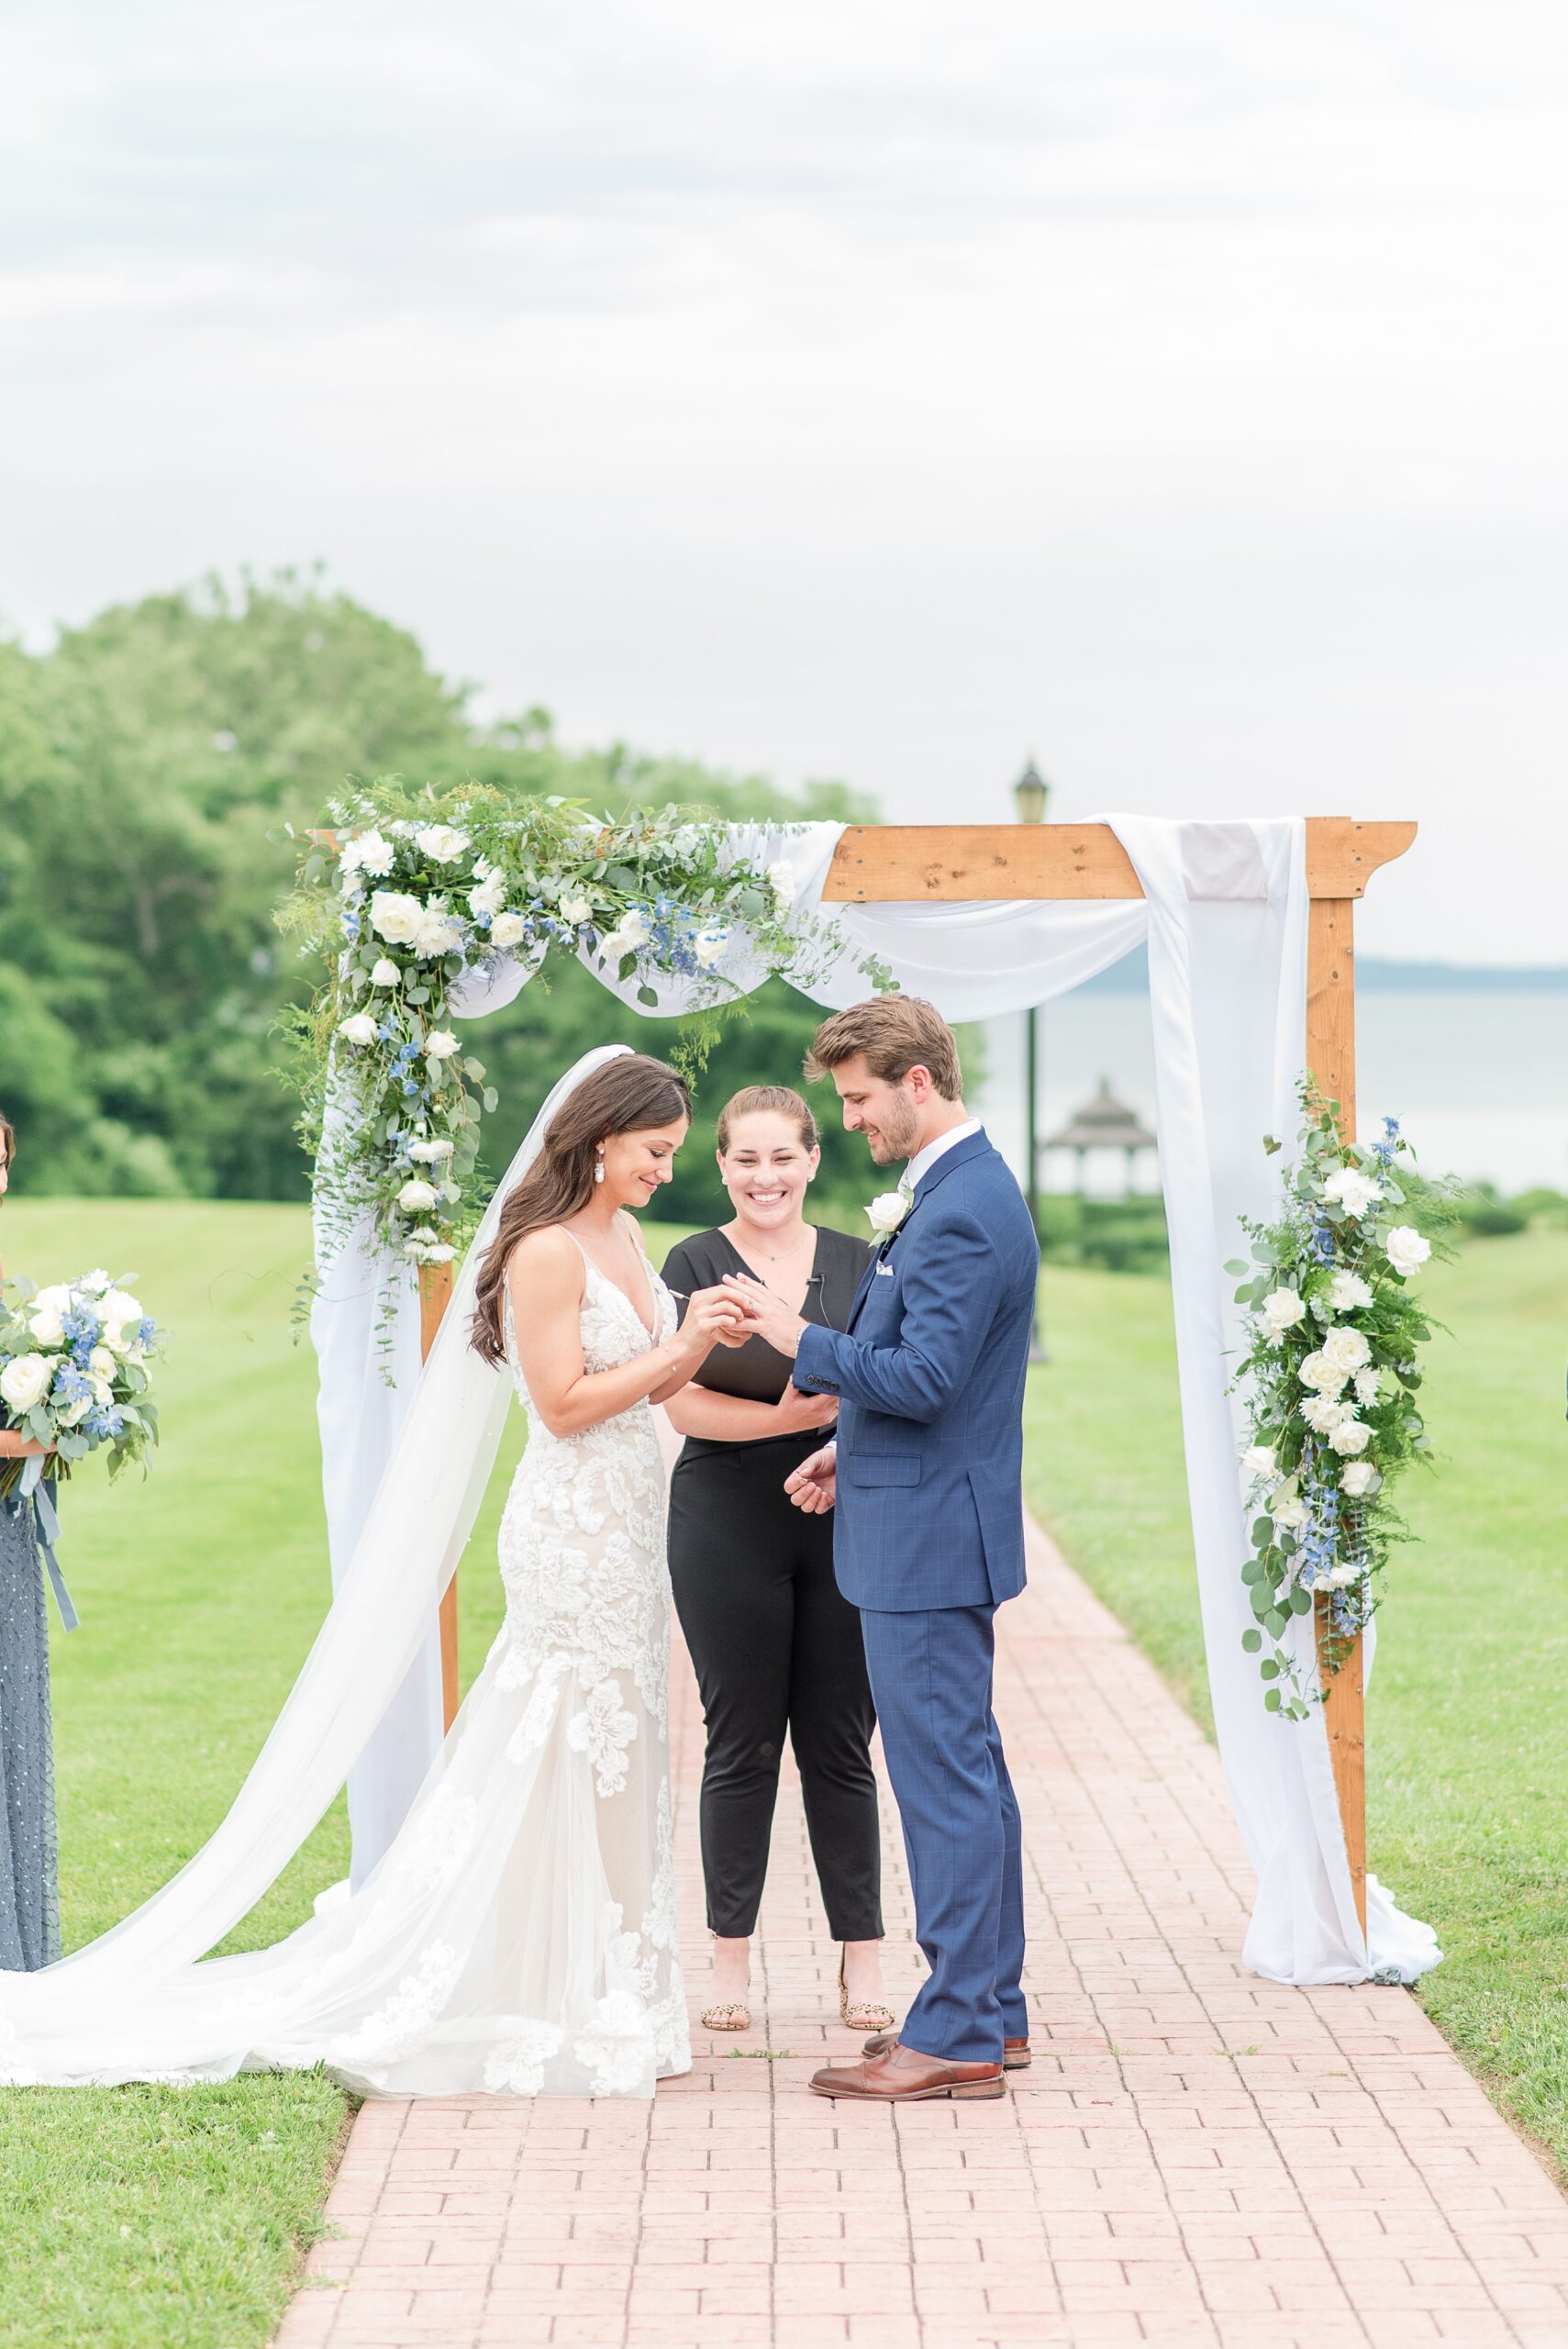 A bride puts the ring on her groom's finger during their outdoor Swan Harbor Farm Wedding ceremony